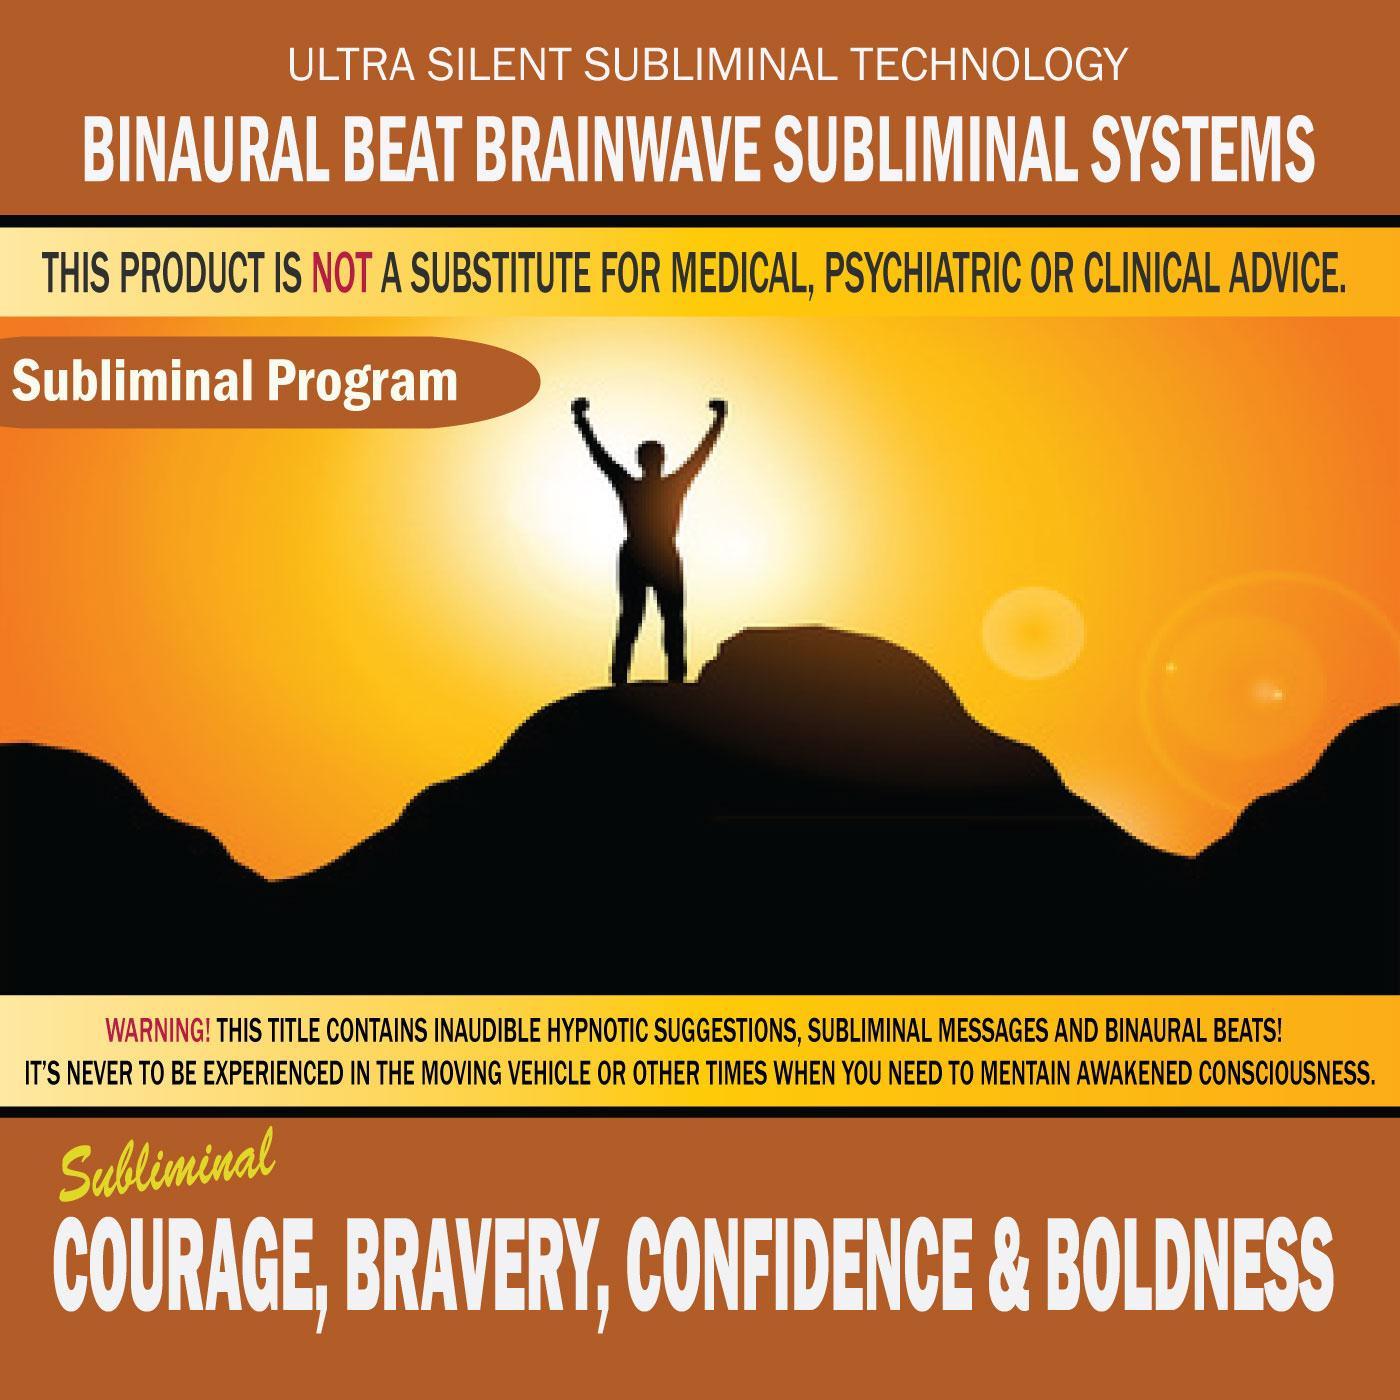 Courage, Bravery, Confidence & Boldness